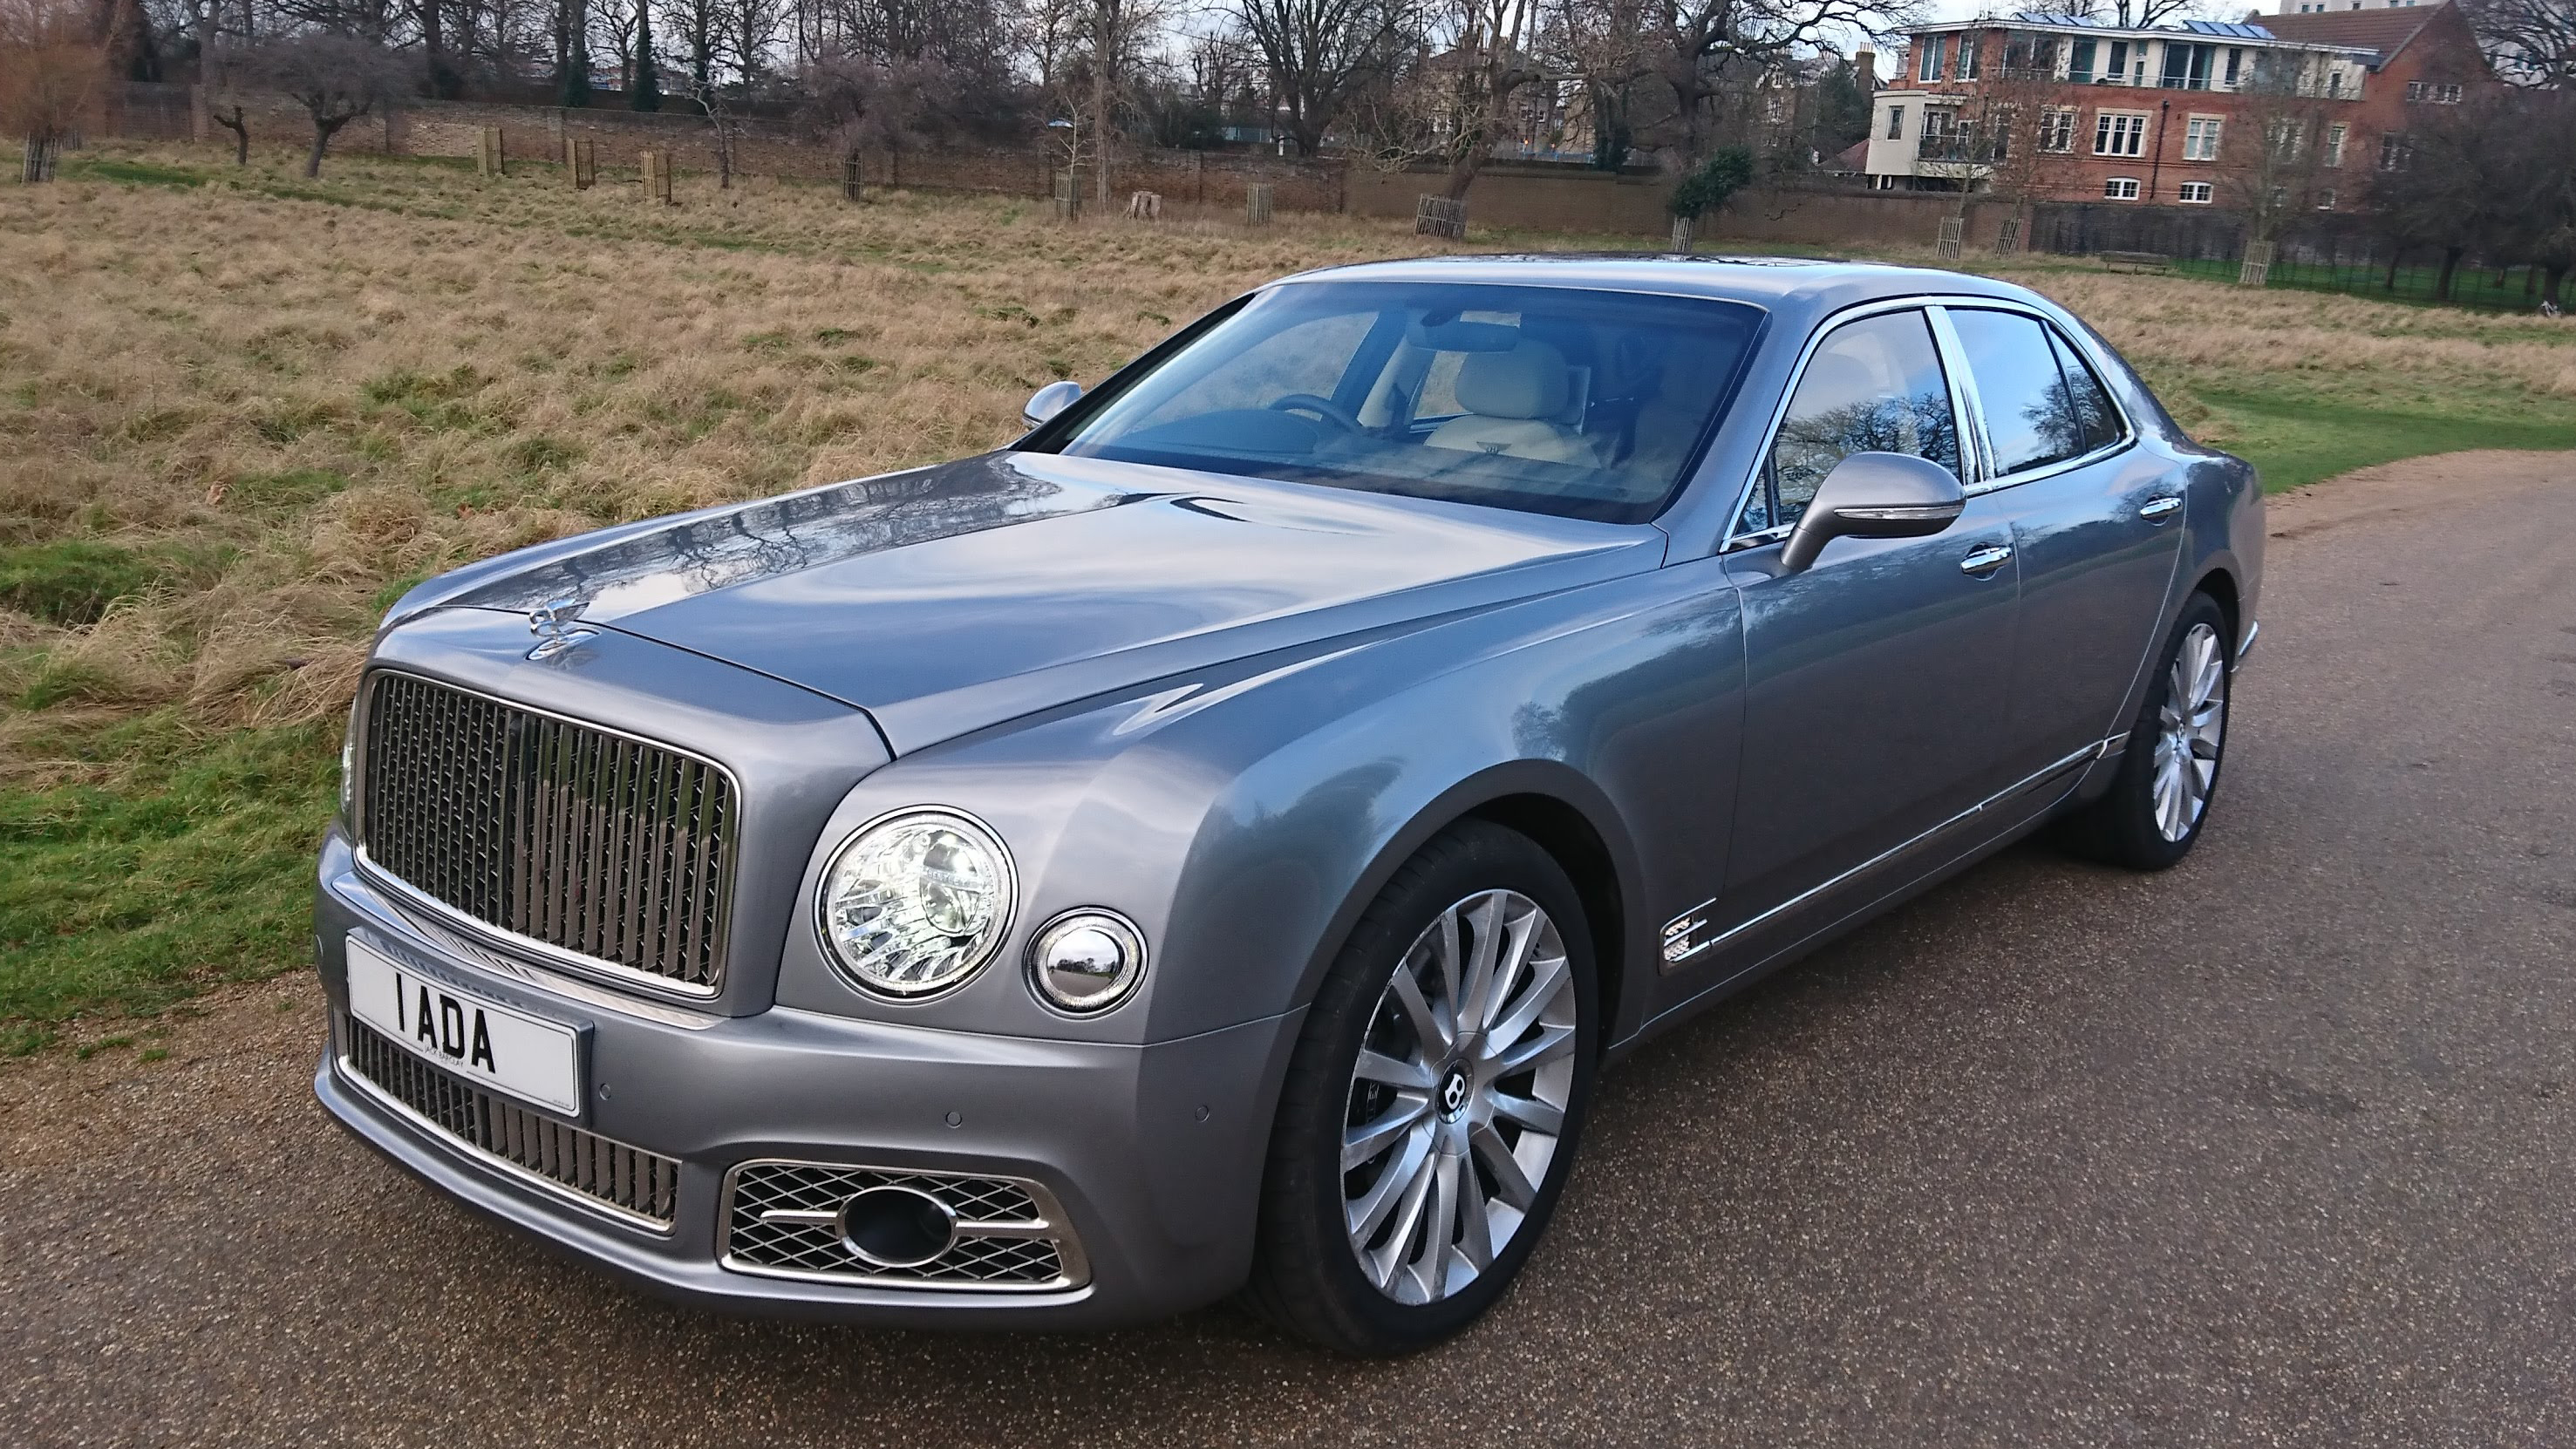 Modern Silver Benltey Mulsanne at a local Walton-on-Thames park in a winter background.